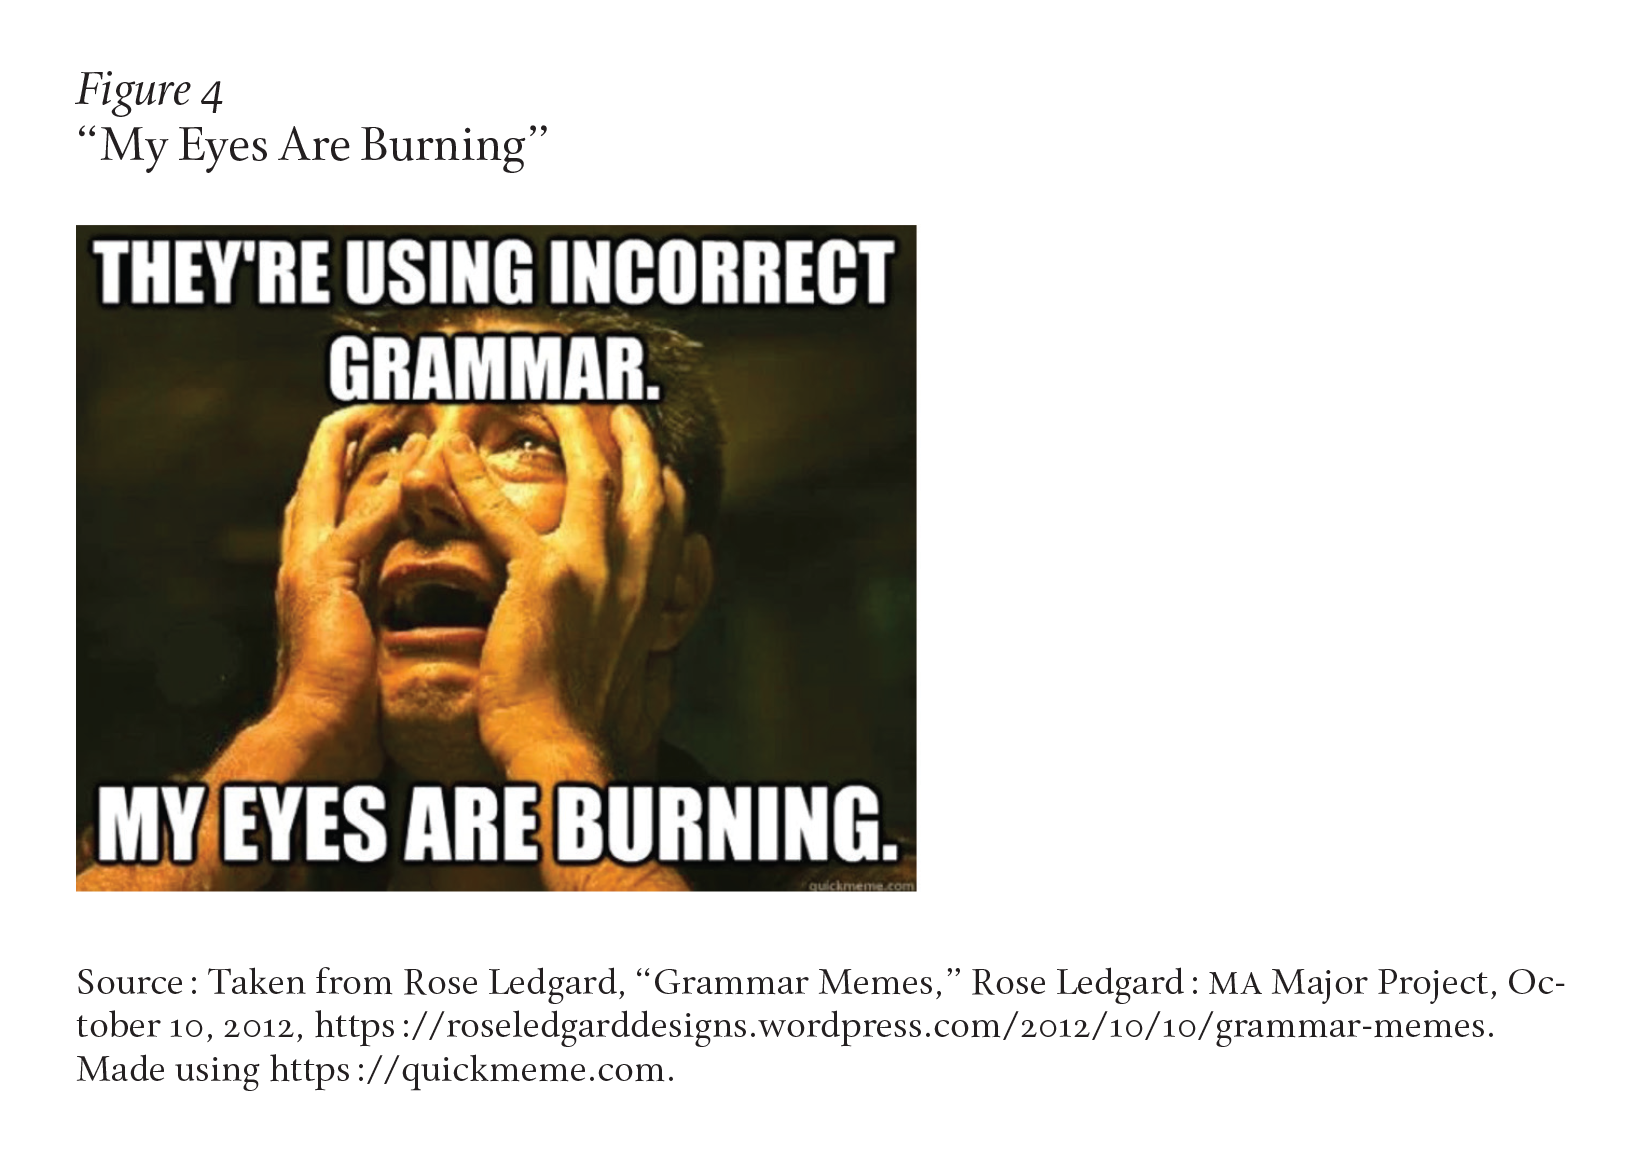 A person holds their face and grimaces. Over the image, the text reads: “They’re using incorrect grammar. My eyes are burning.”